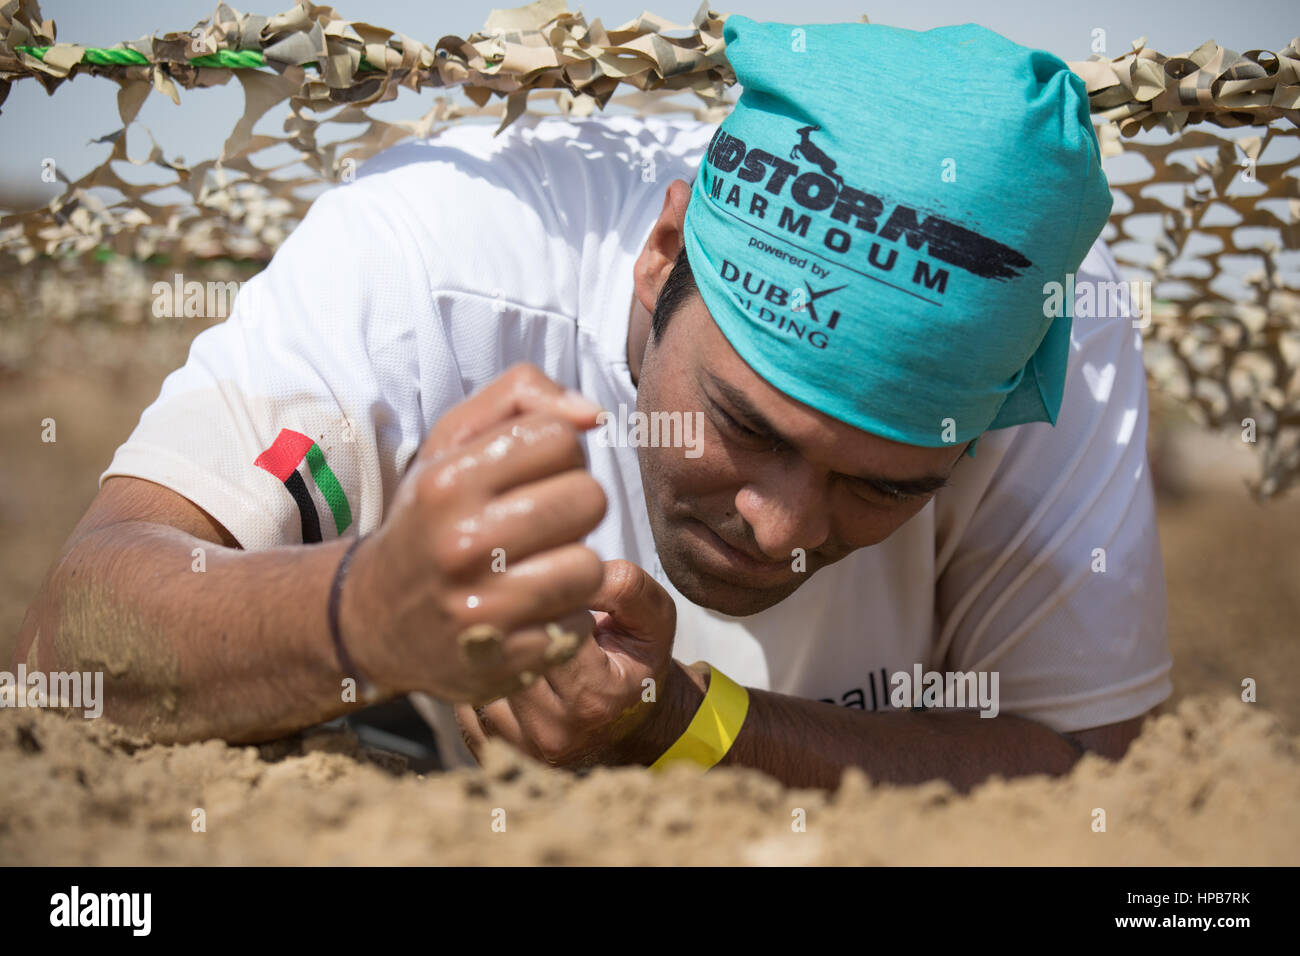 Dubai, UAE - Feb 10th, 2017: Participating in the SandstormDXB race: an off-track obstacle running competition. Stock Photo